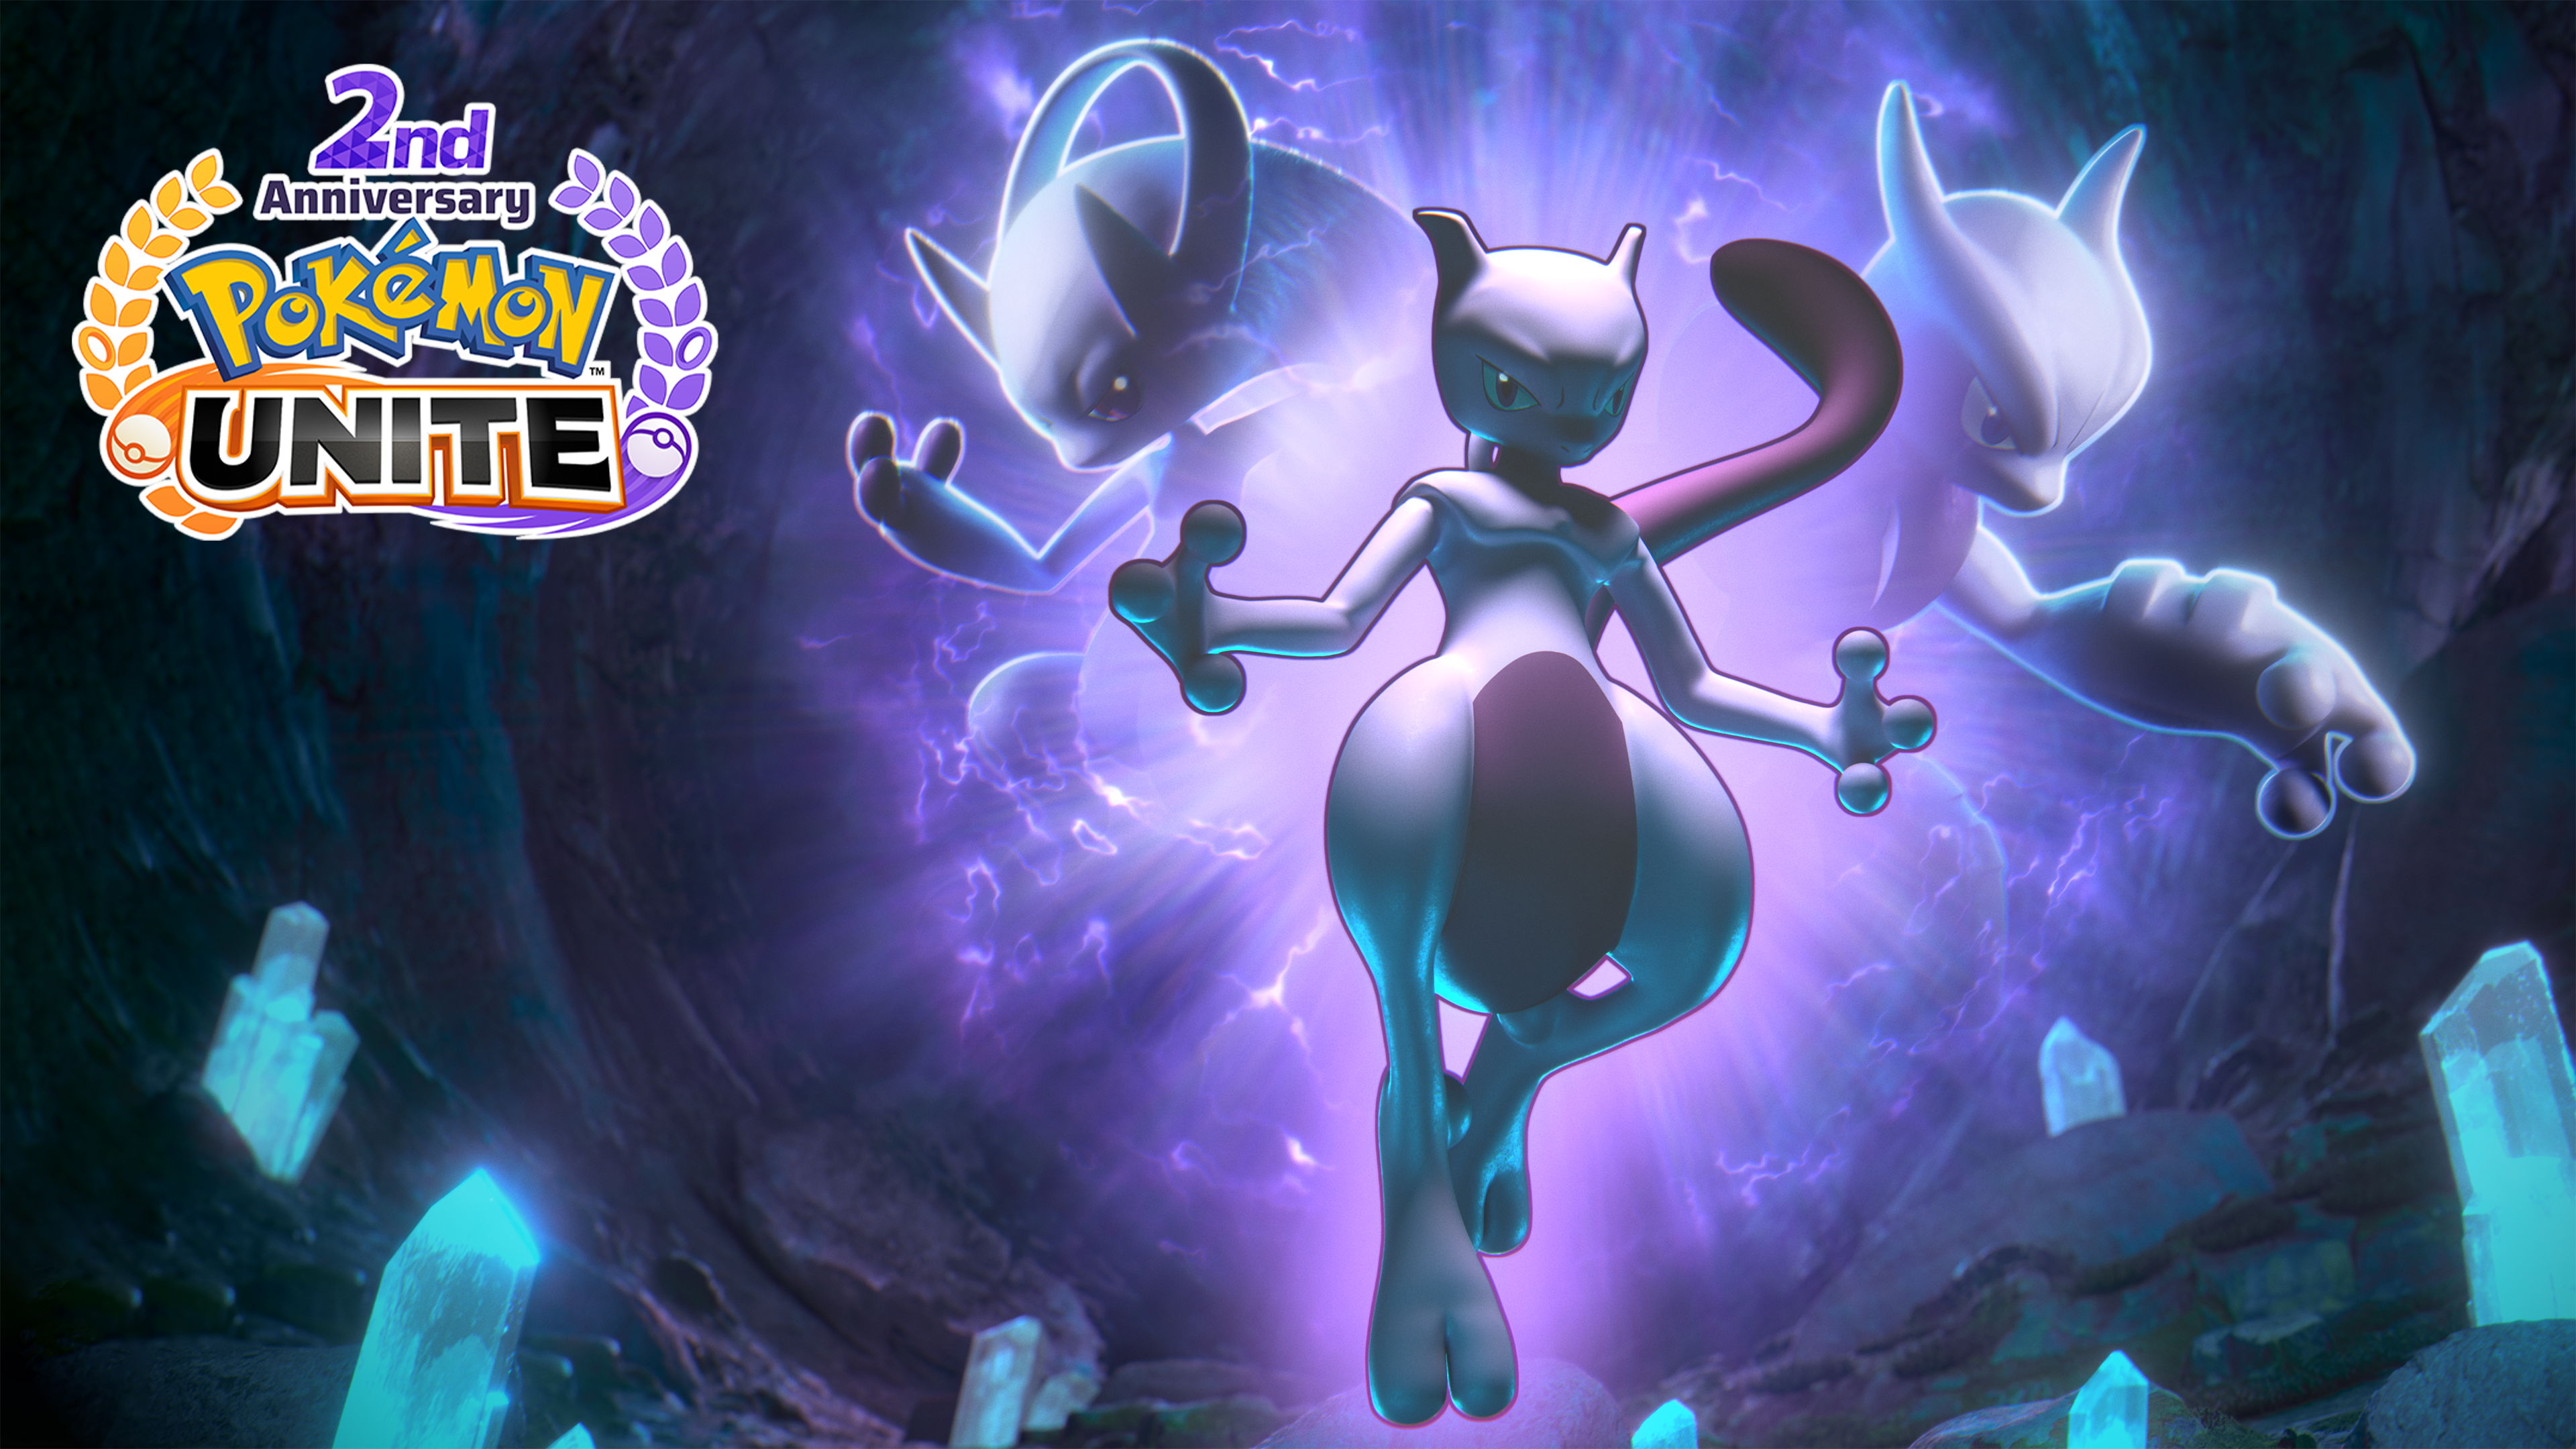 Get Unlimited Mewtwo without Raid Pass Pokémon Go, Best Moveset Mewtwo